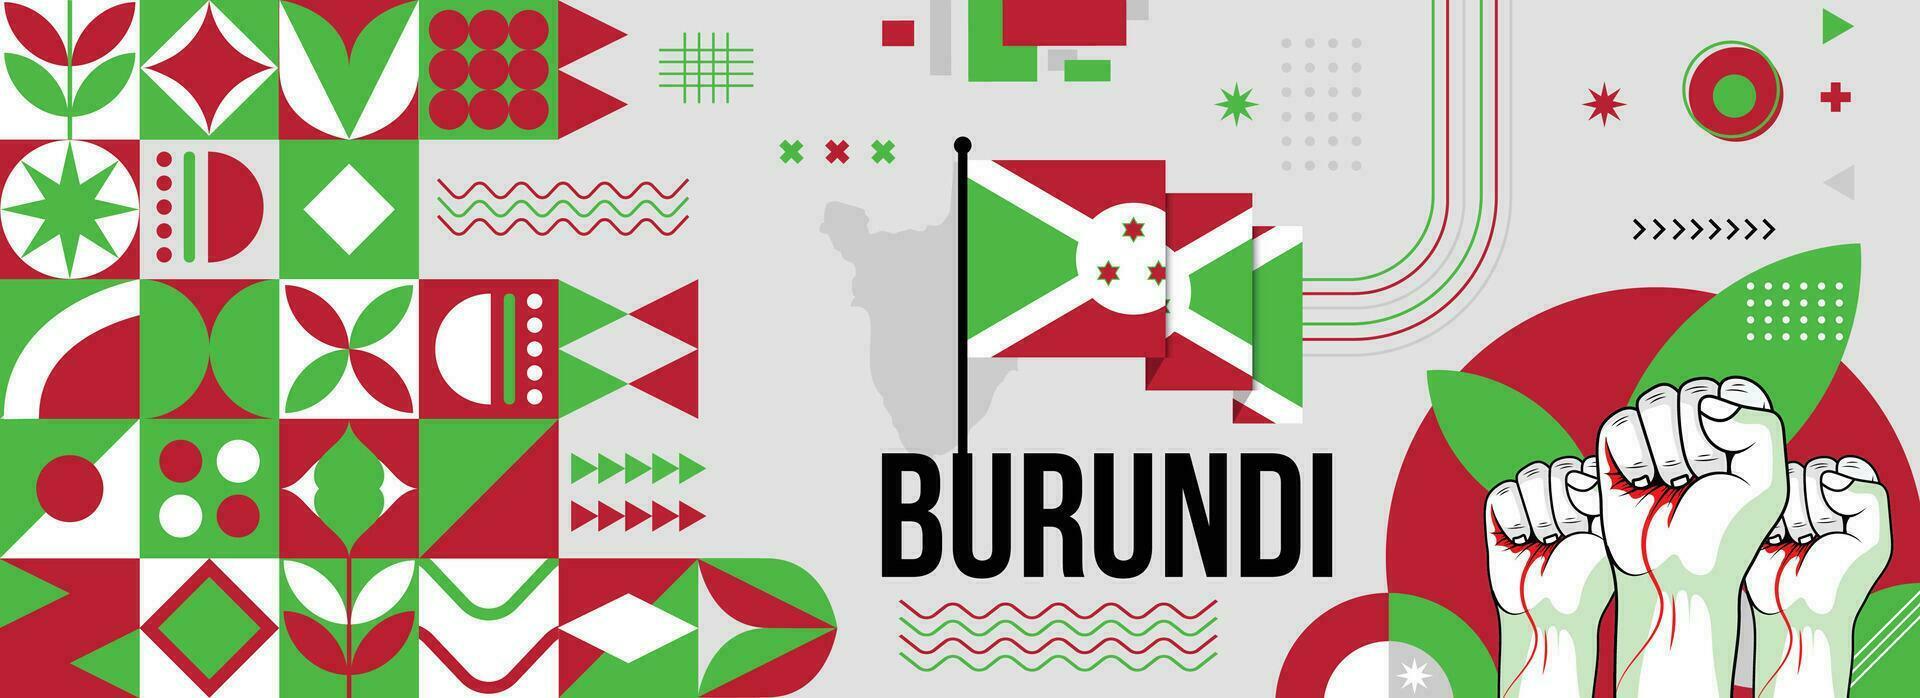 Burundi national or independence day banner for country celebration. Flag and map of Burundi with raised fists. Modern retro design with typorgaphy abstract geometric icons. Vector illustration